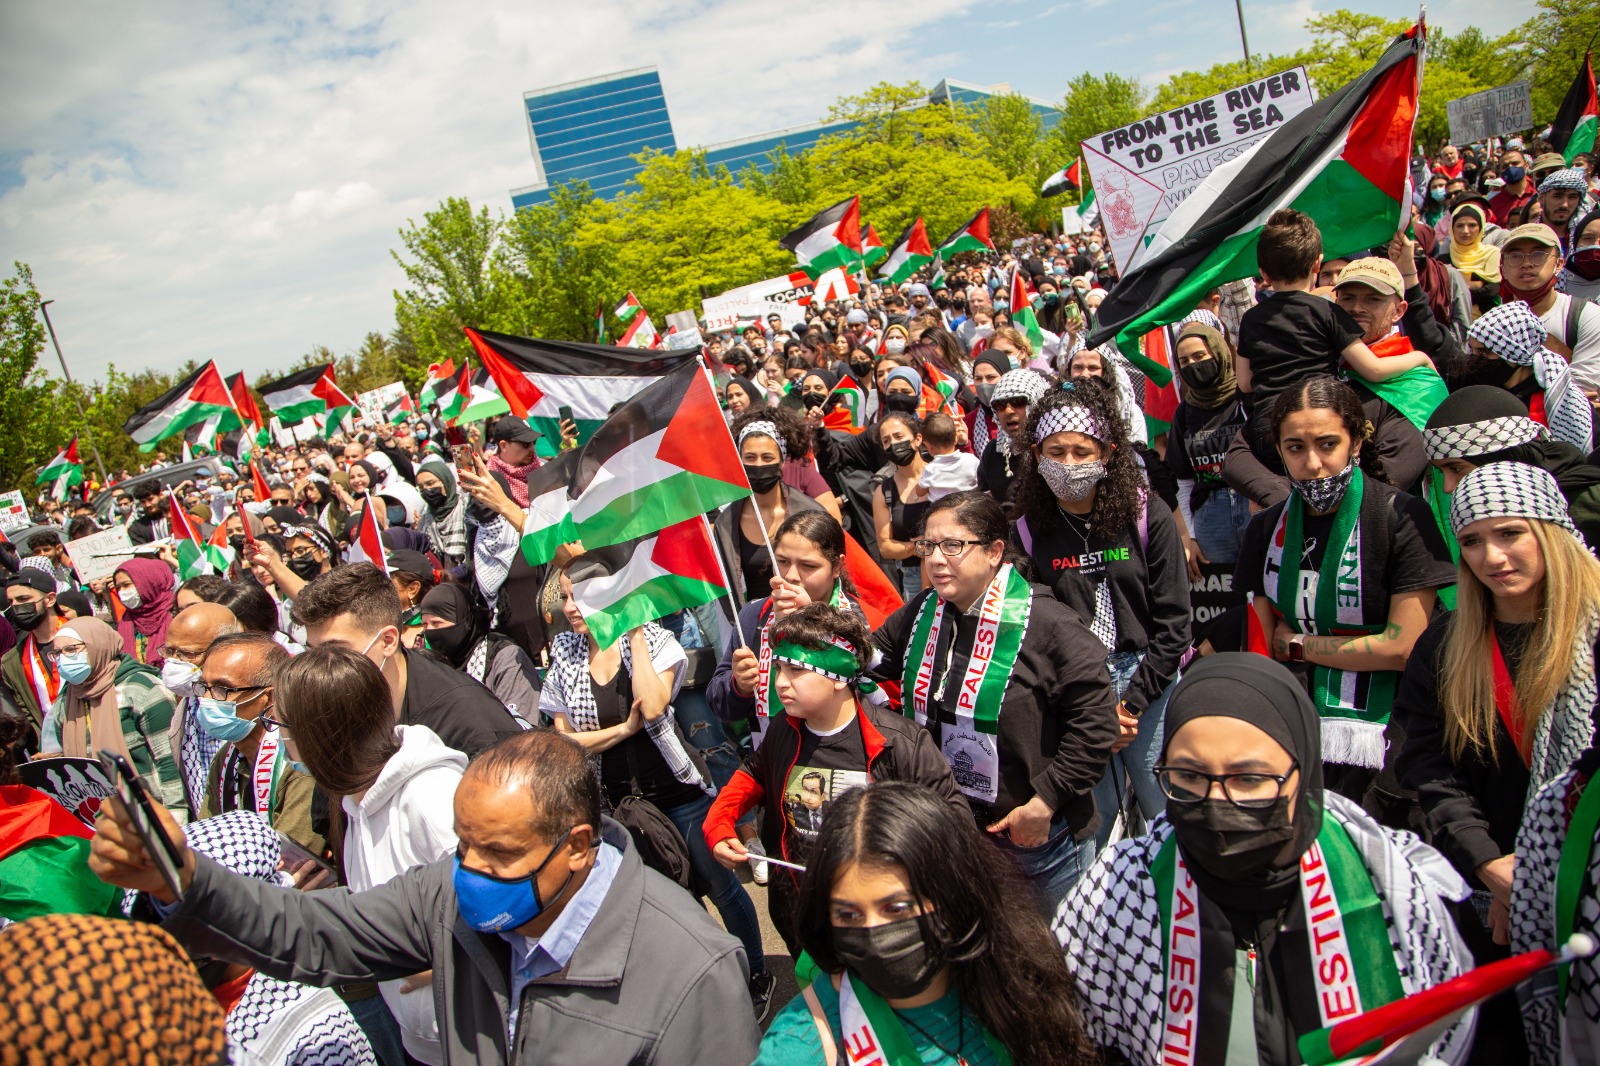 A rally for Palestine in Dearborn, May, 2021. Photo: Imad Mohamad/The Arab American News